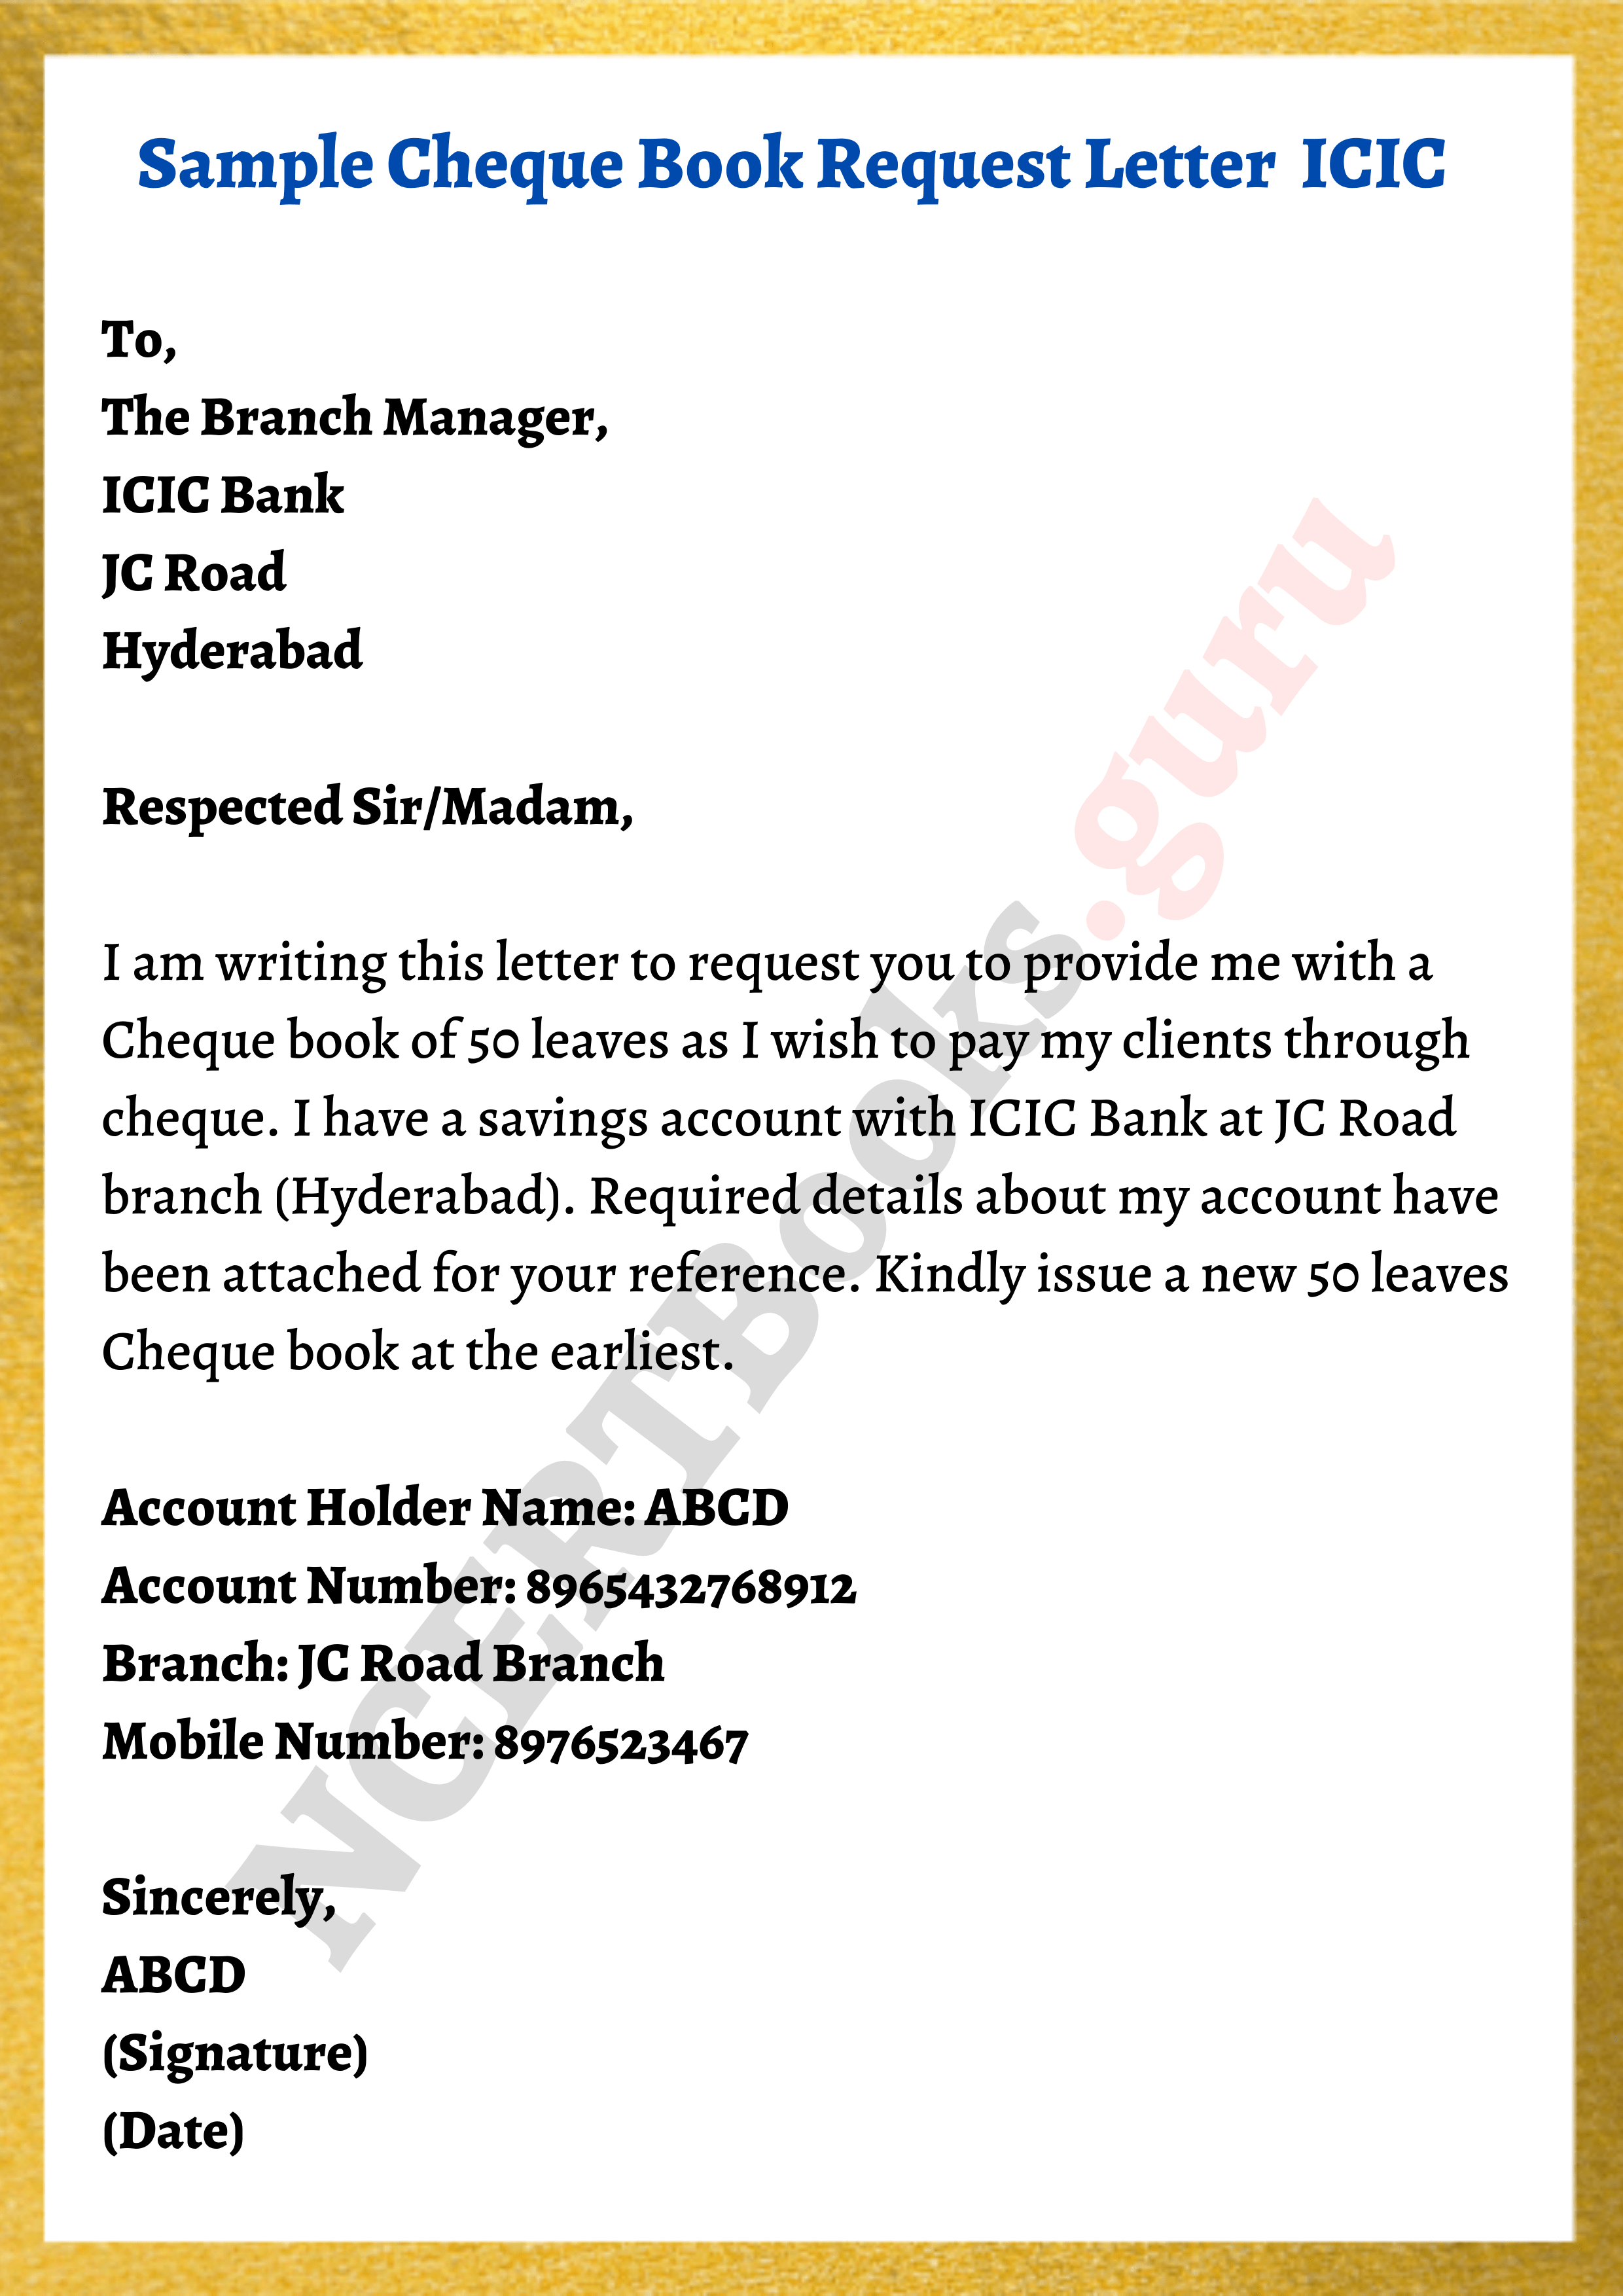 sample icic bank cheque book request letter